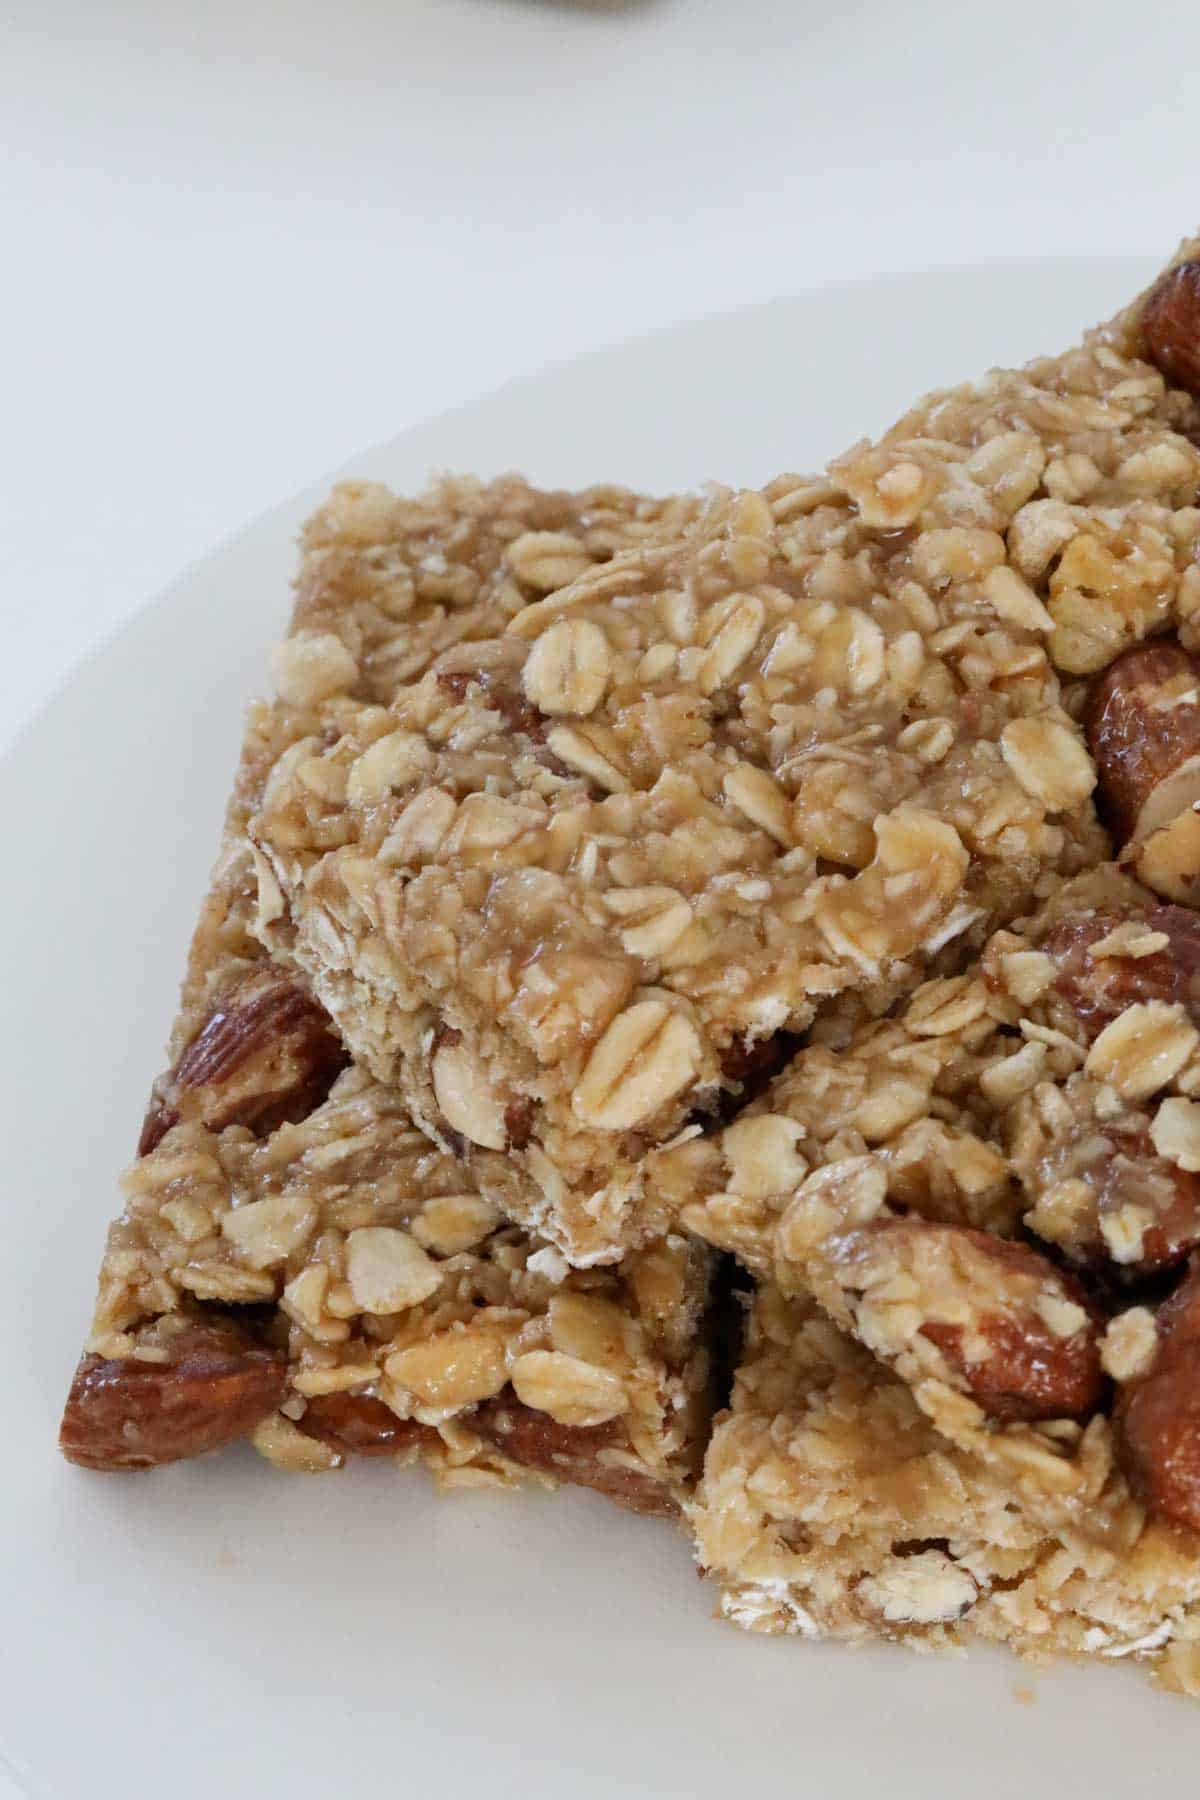 Oat slice with almonds.